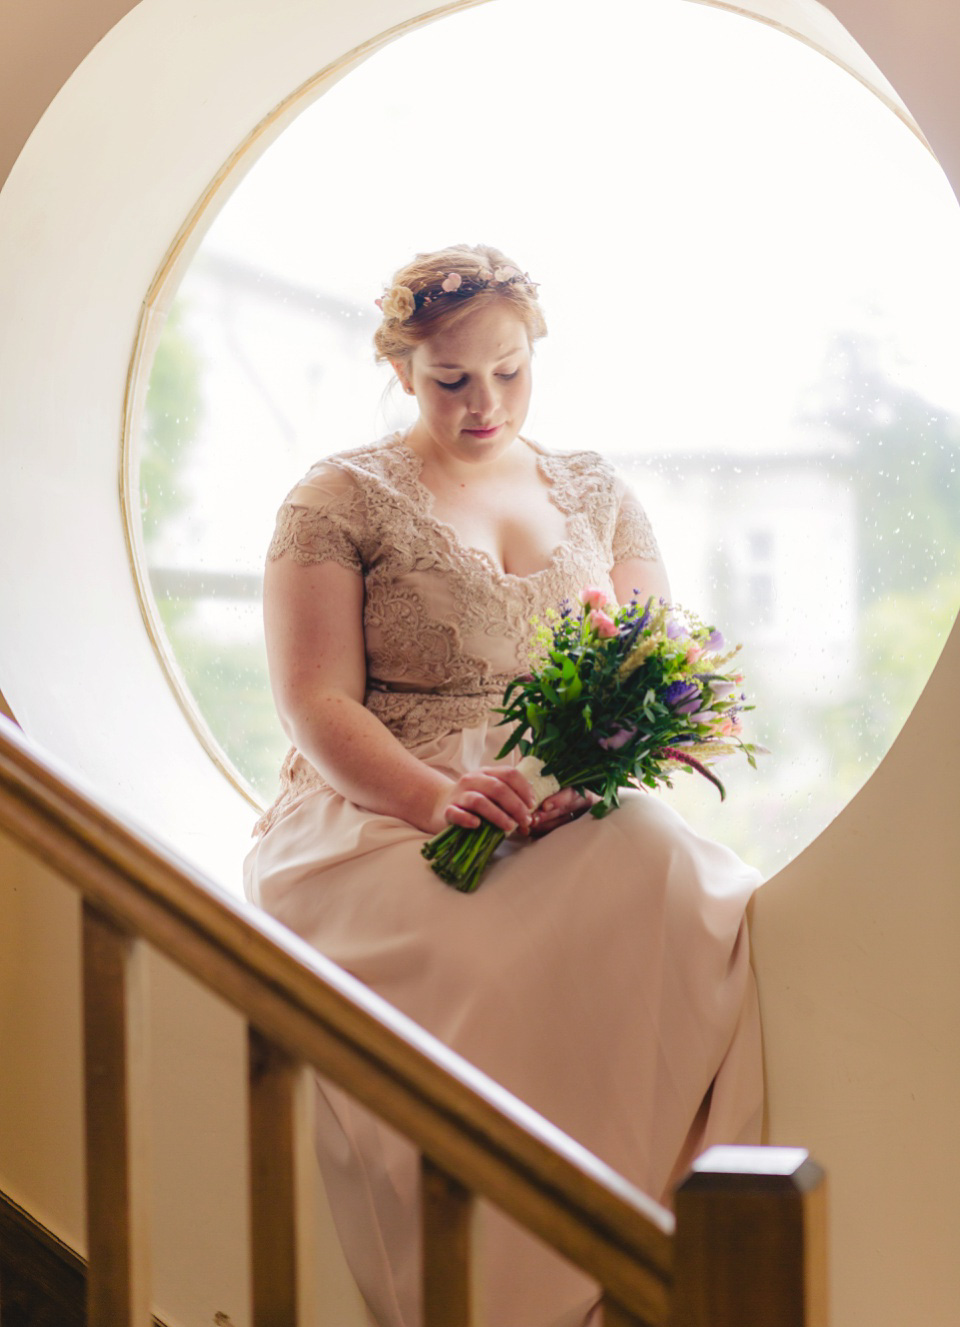 The bride wears a Jacques Vert dress from Debenhams for her Welsh country house wedding.